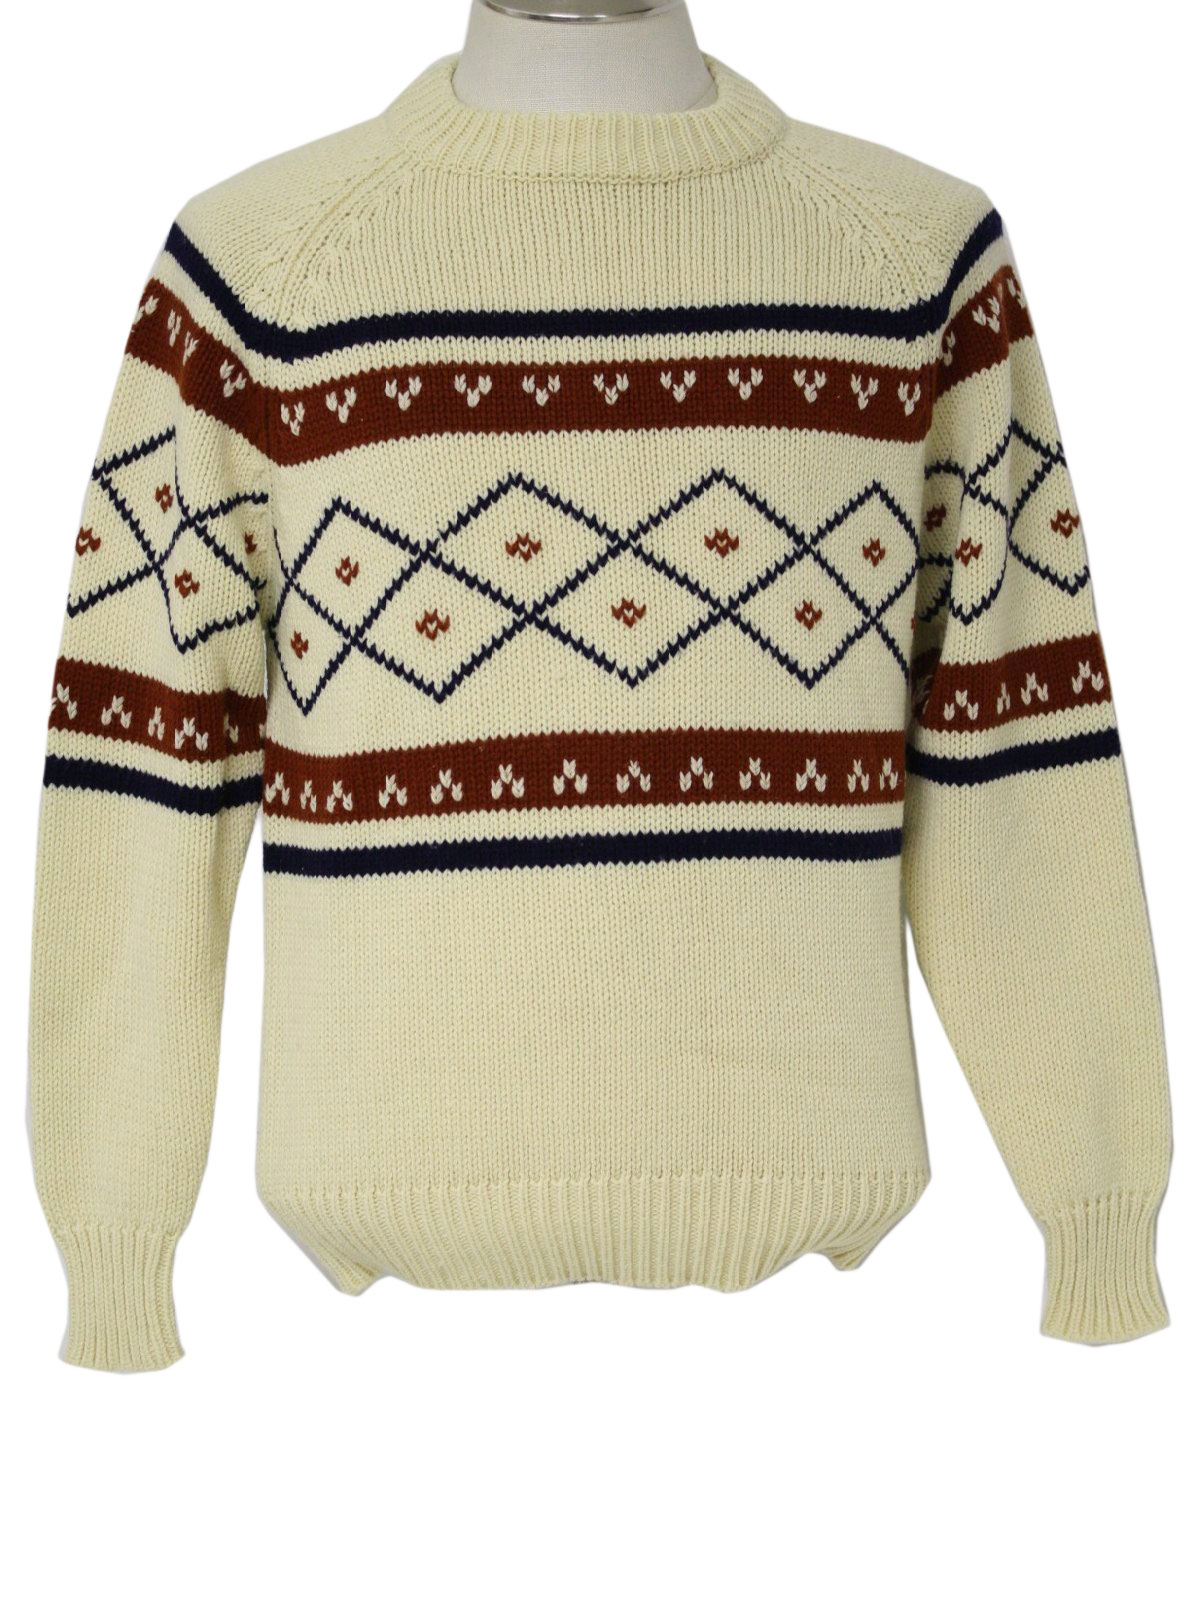 Vintage 1980's Sweater: 80s -No Label- Mens ivory, navy, and brown ...